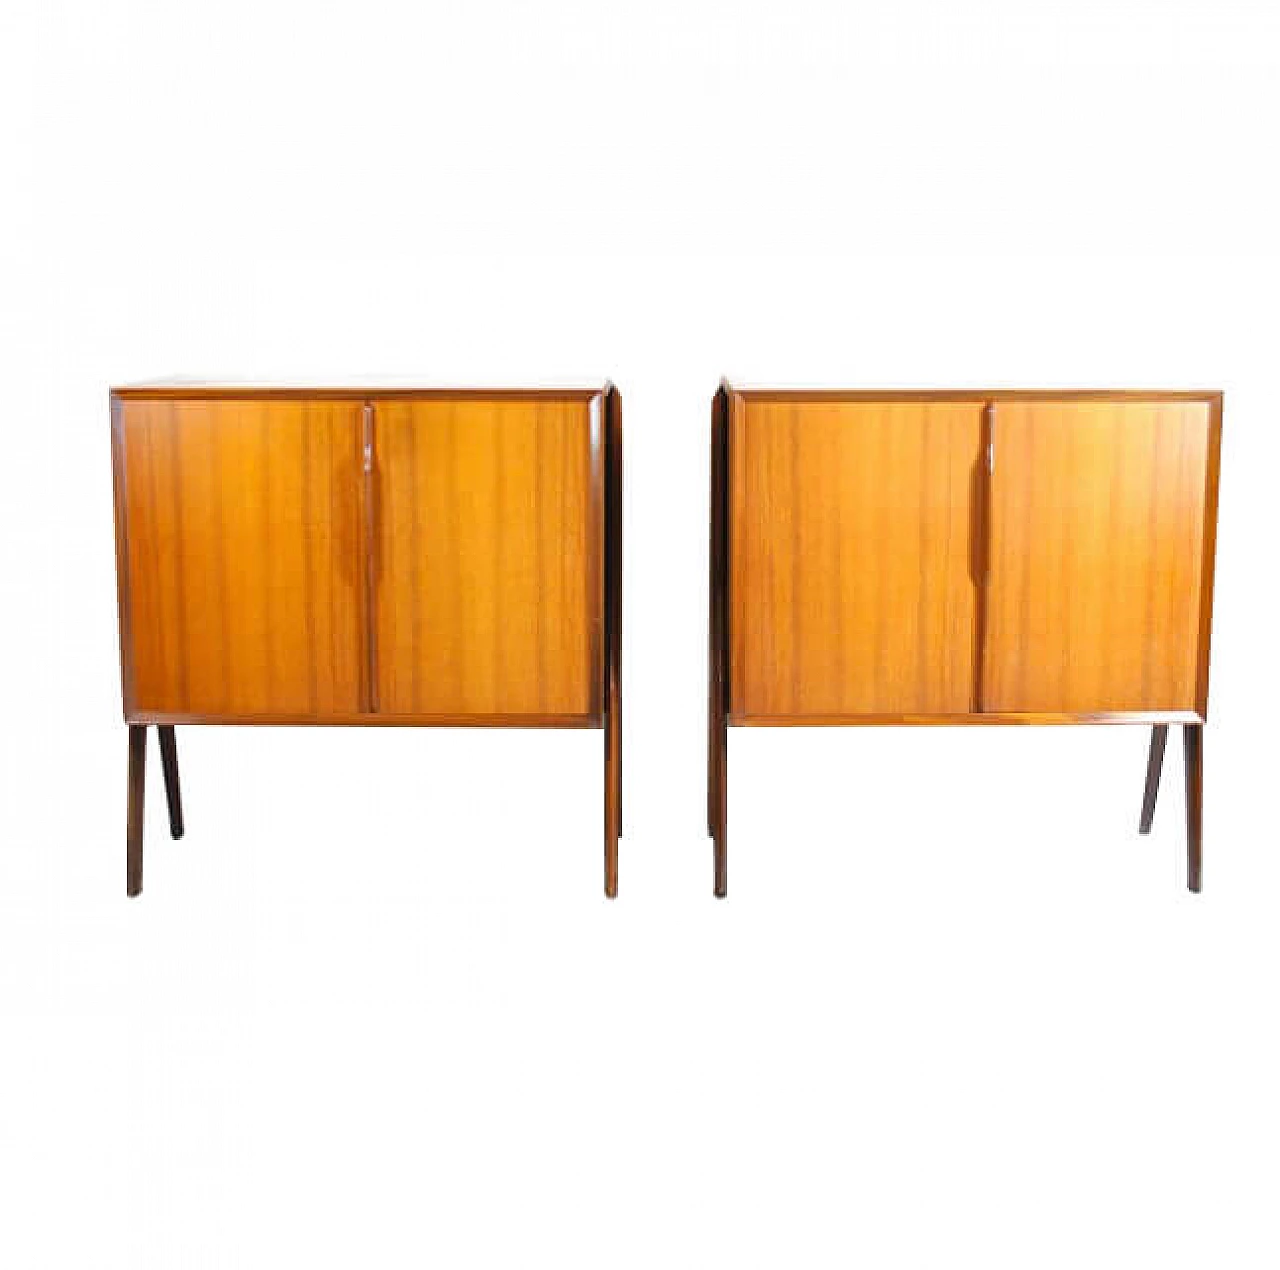 Pair of Scandinavian style cabinets, 60s 1212390